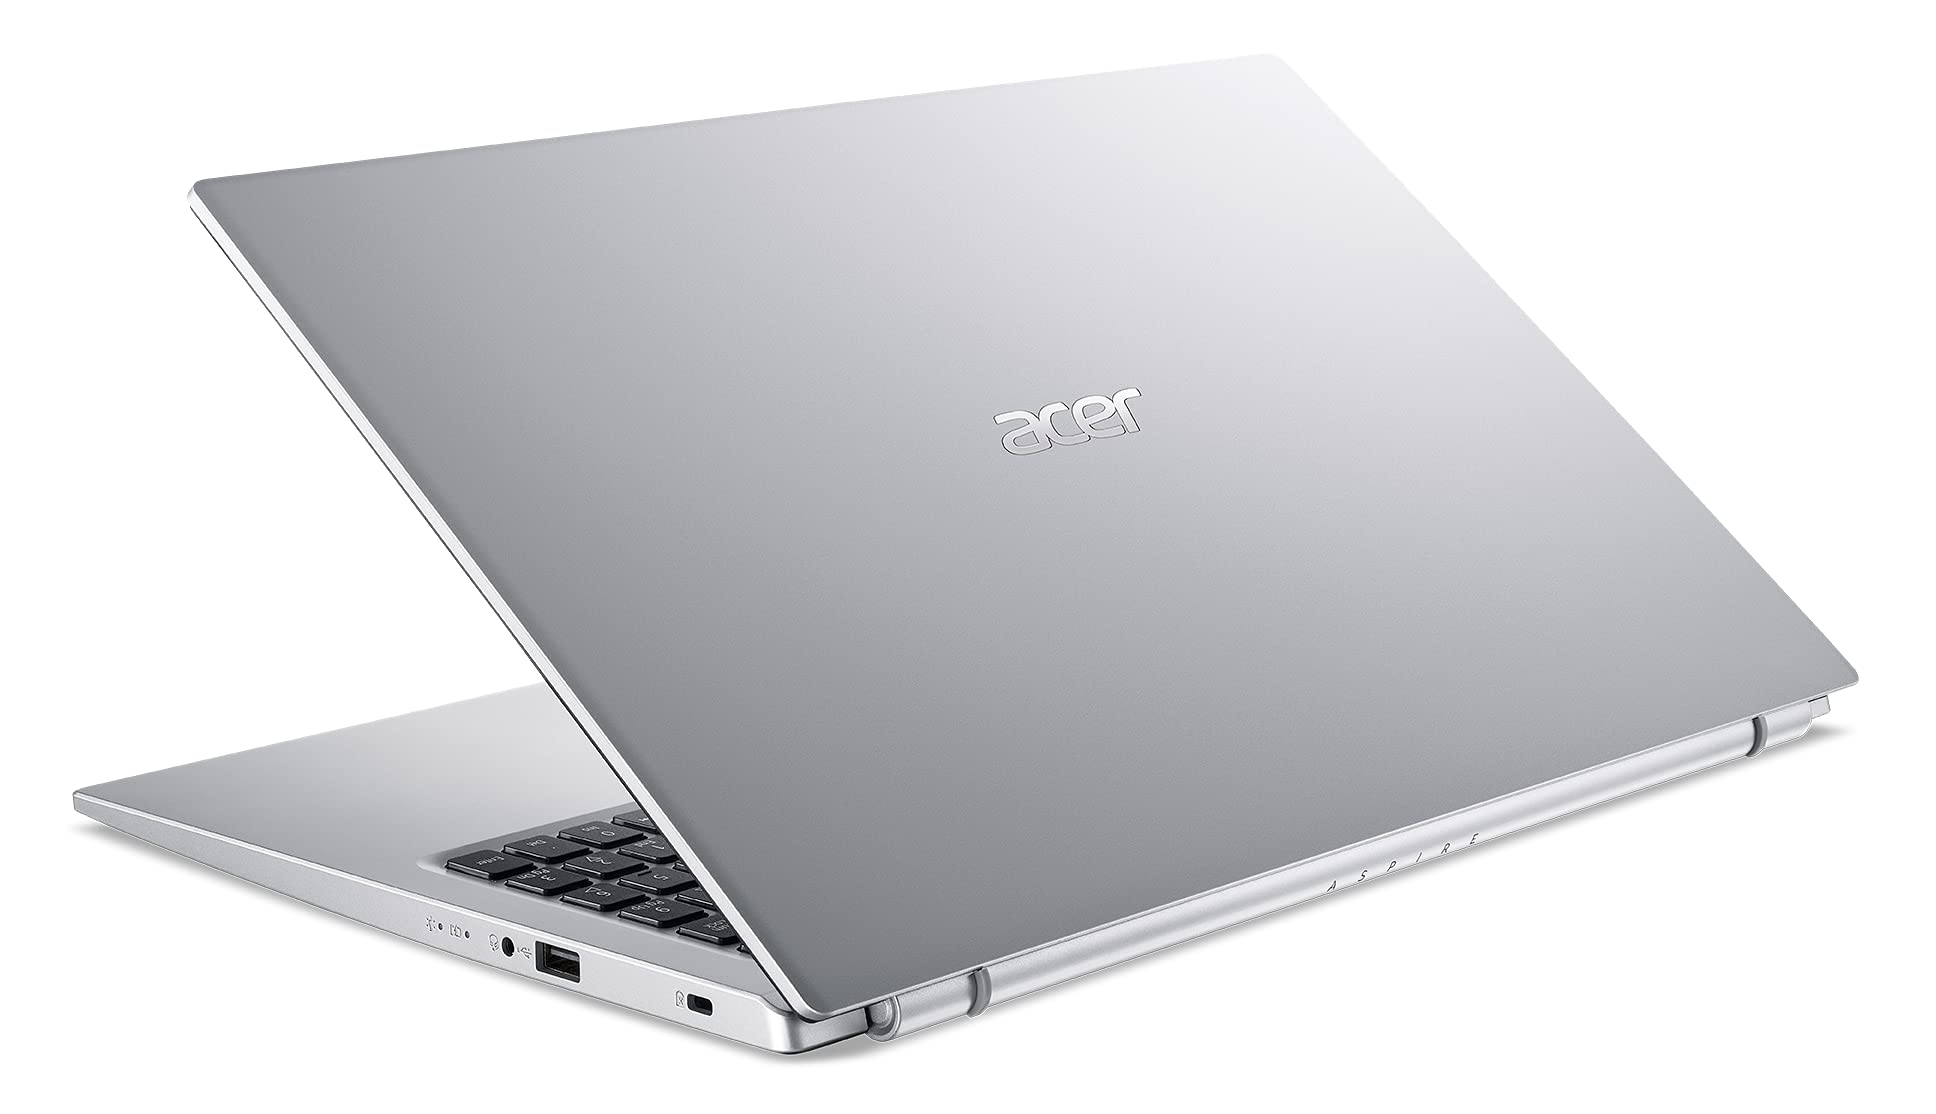 Acer Aspire 3 A315 Notebook with 11th Gen Intel Core i5-1135G7 Quad Core Upto 4.20GHz/8GB DDR4 RAM/256GB SSD Storage/Intel UHD Graphics/15.6" FHD IPS Display/Win 11/Pure Silver